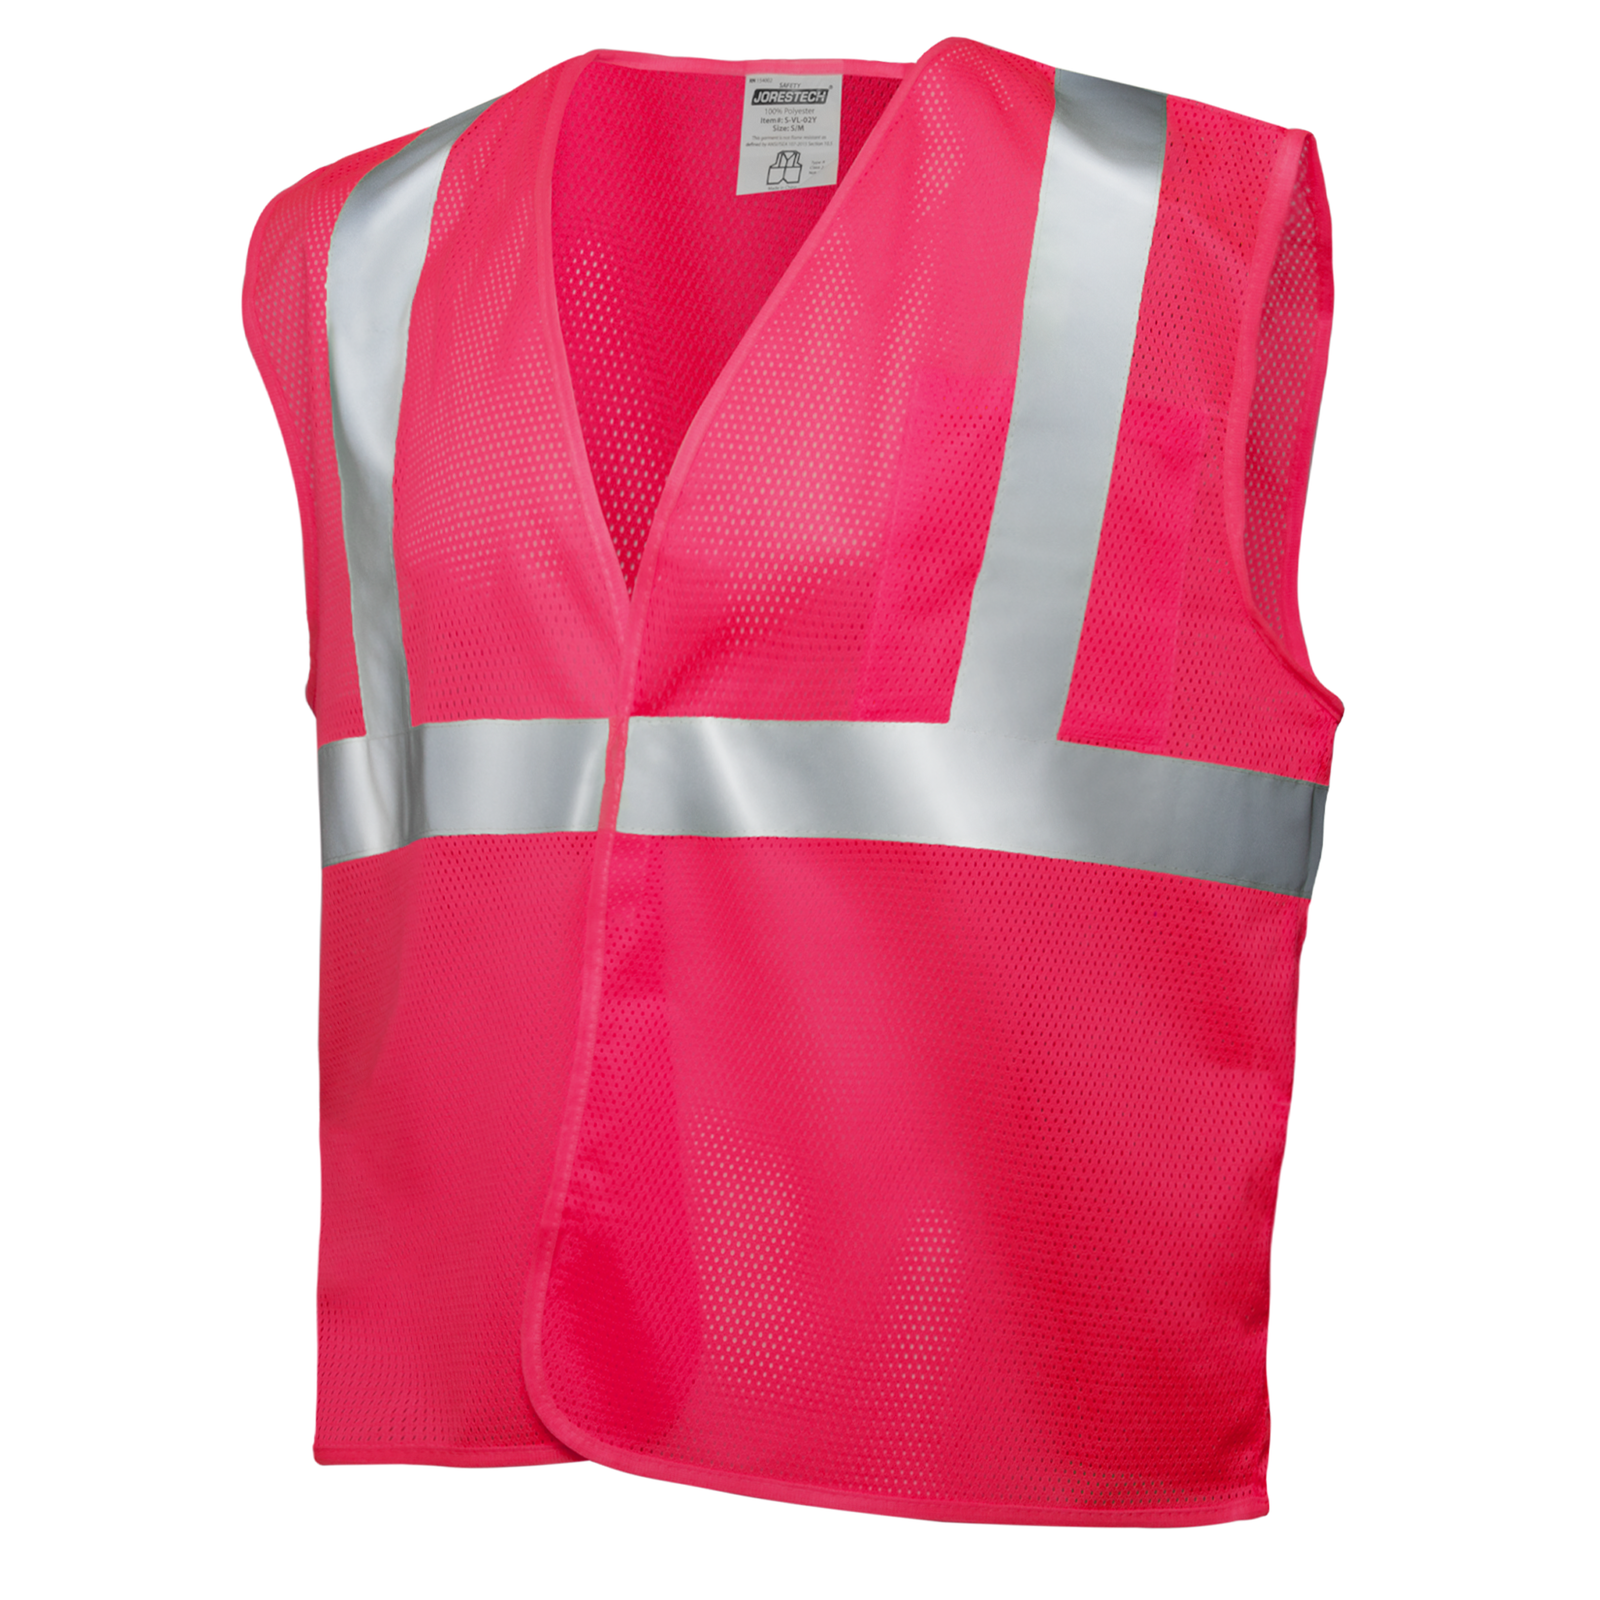 Diagonal view of the pink JORESTECH printed hi-vis mesh safety vest with 2 inches reflective strips.